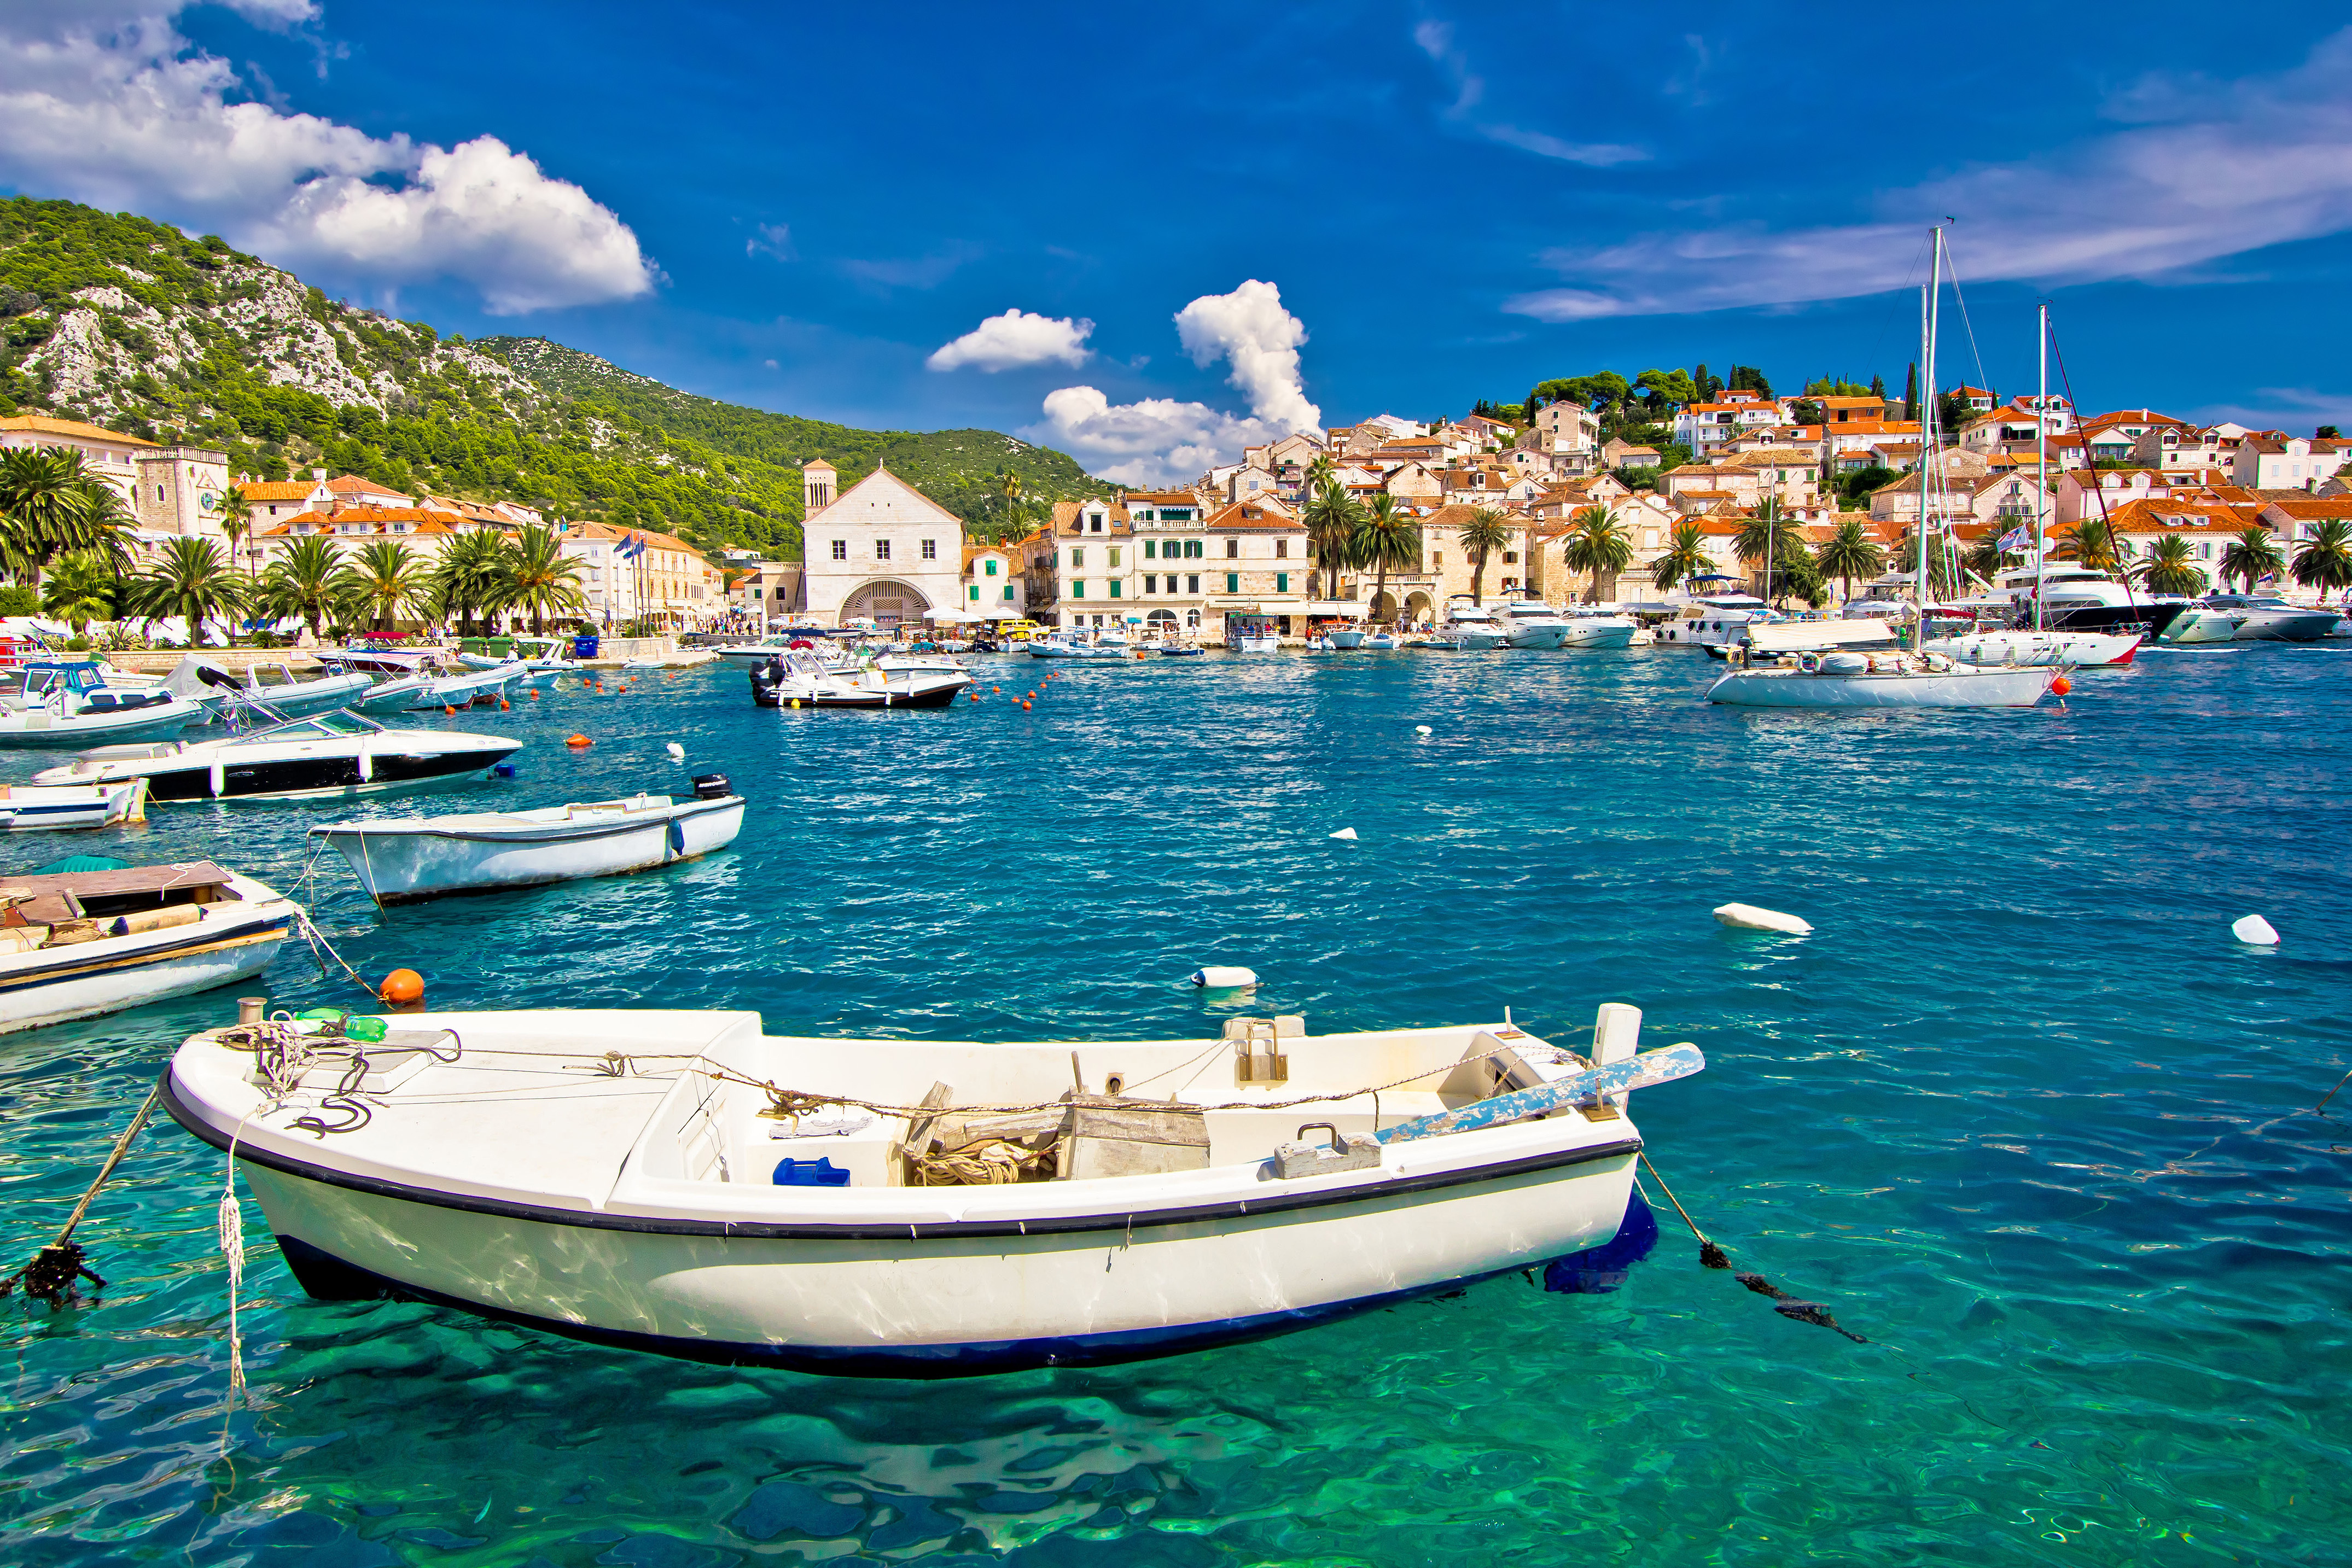 Amazing town of Hvar waterfront